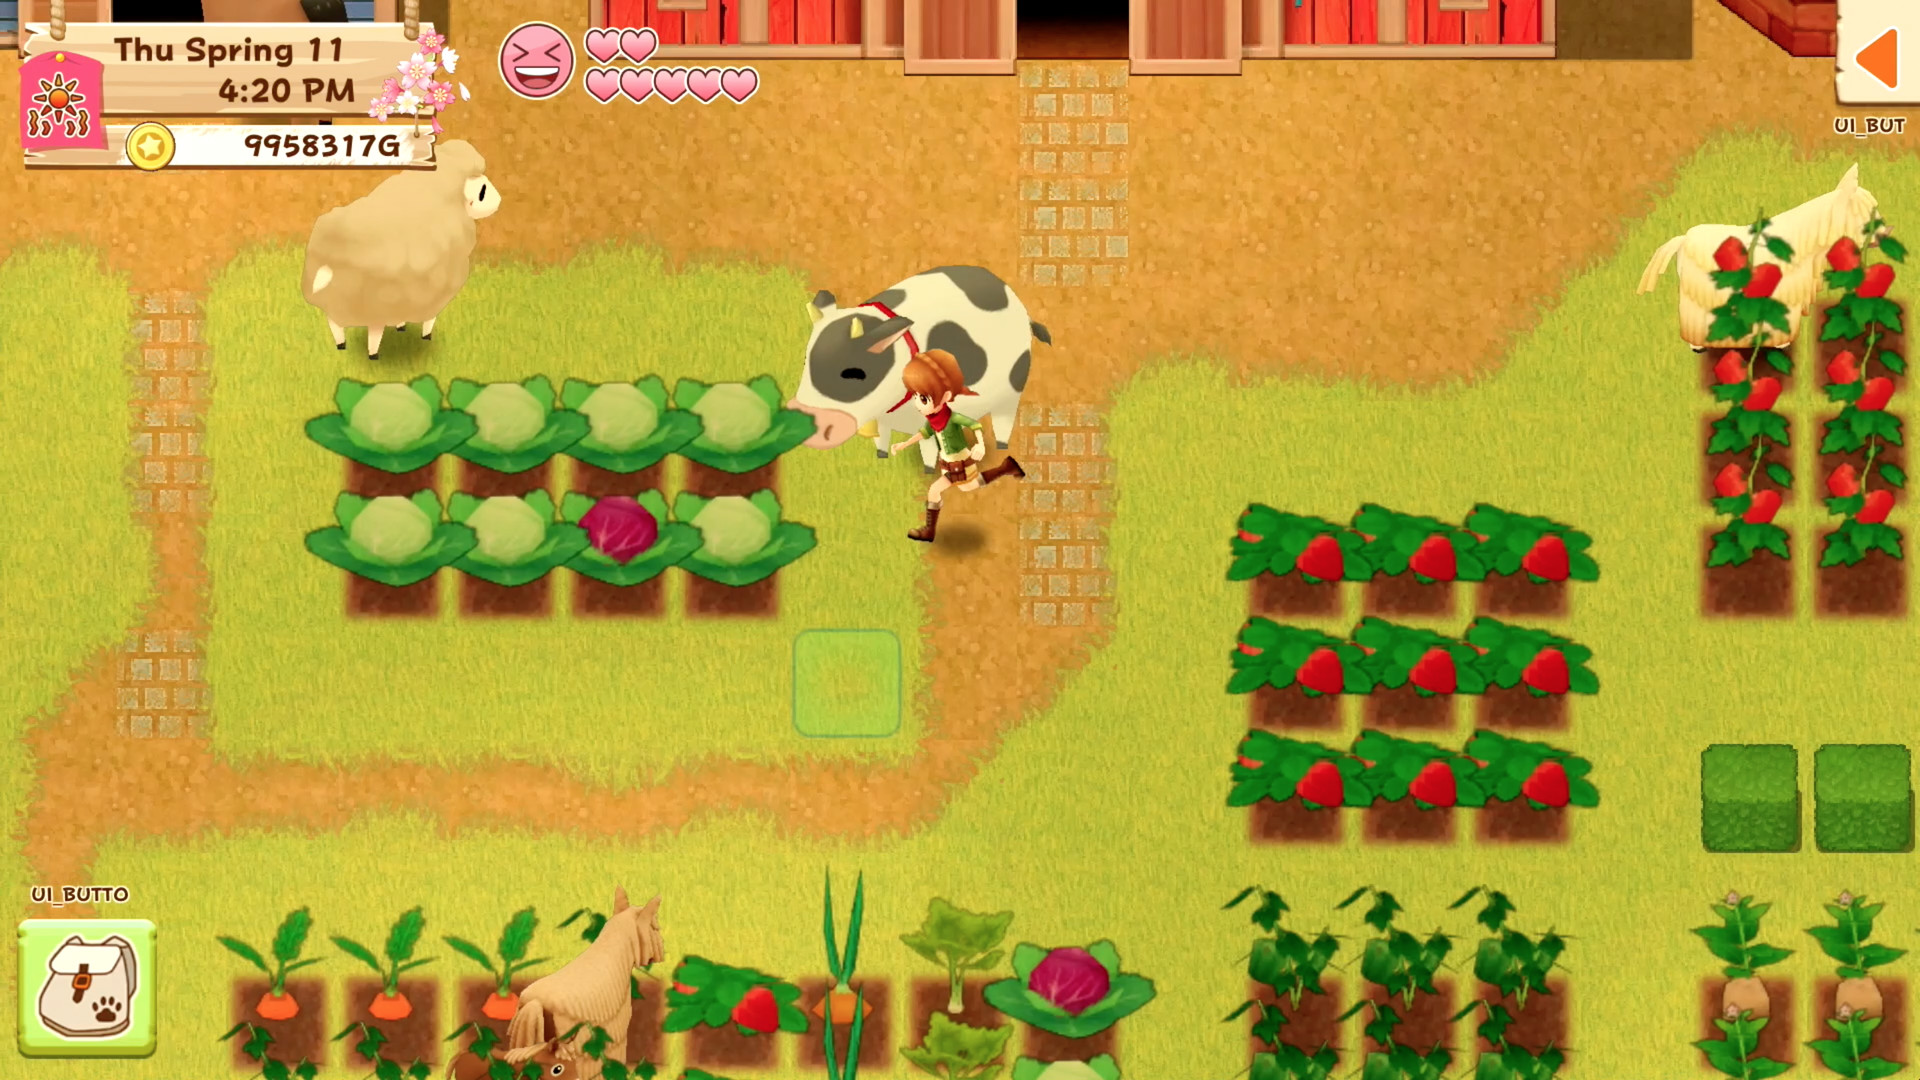 Natsume on Harvest Moon: Light of Hope's graphics - Nintendo Everything